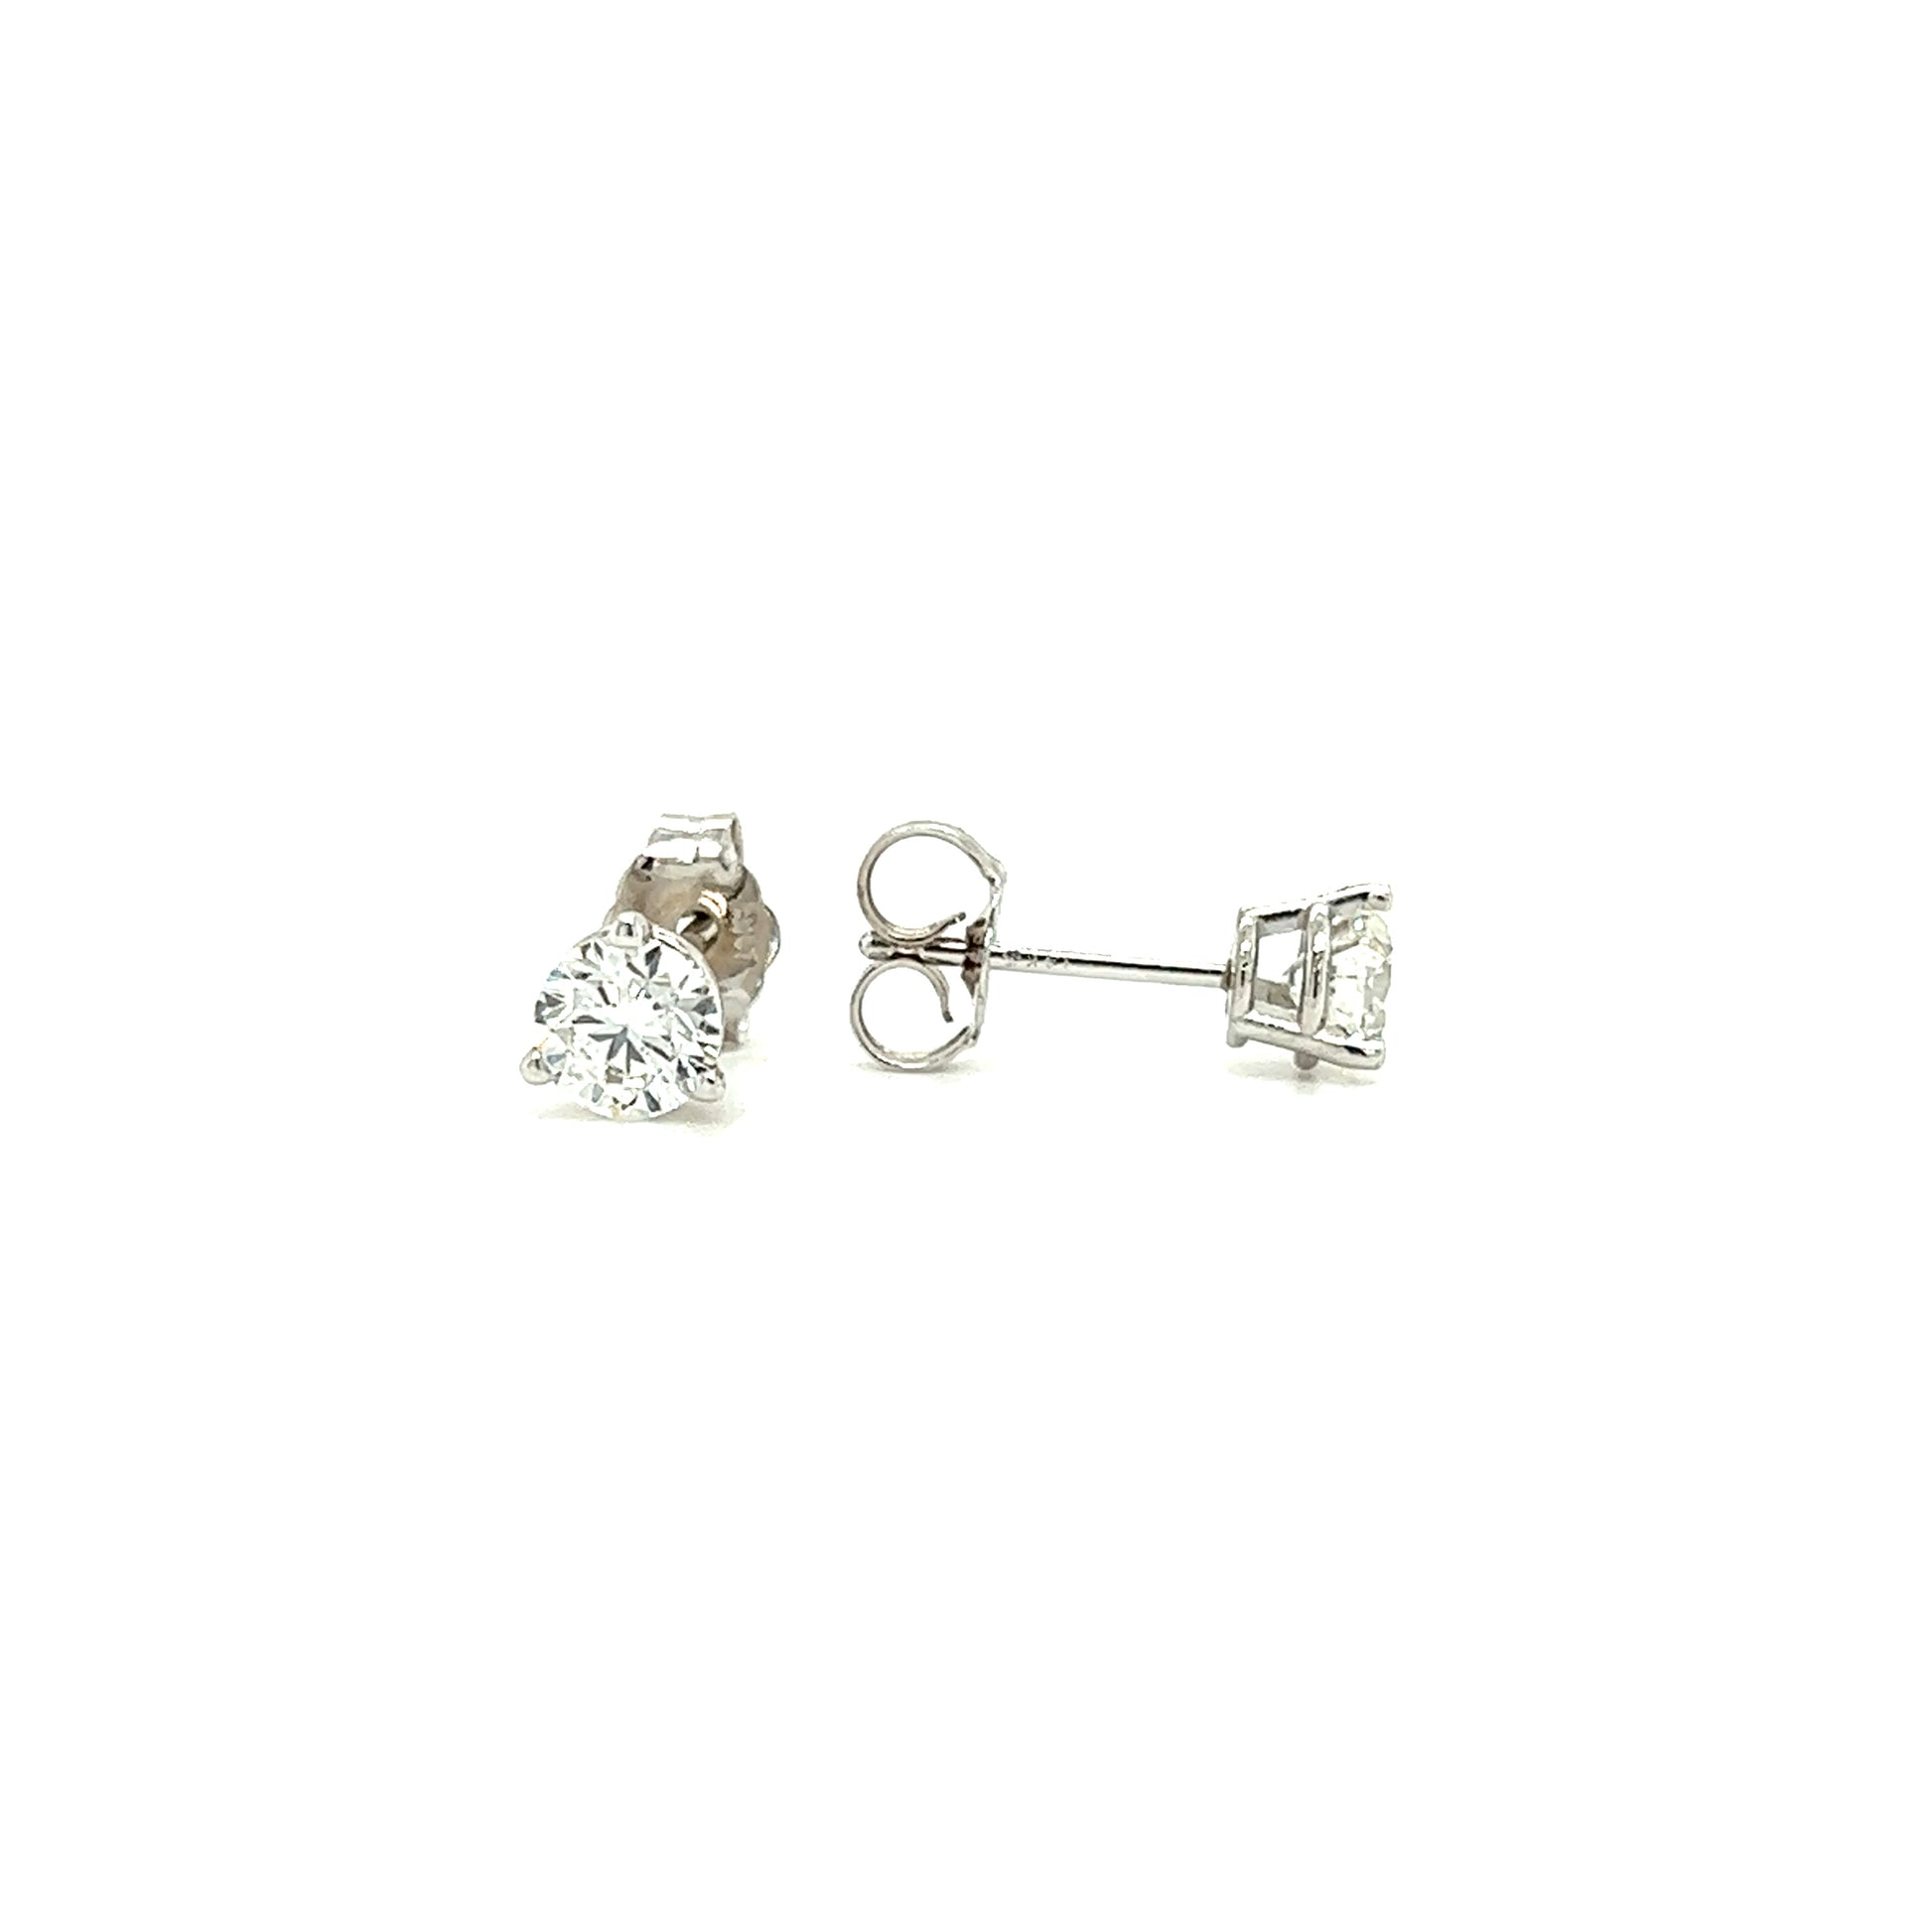 Diamond Stud Earrings with 0.72ctw of Diamonds in 14K White Gold Front and Side View